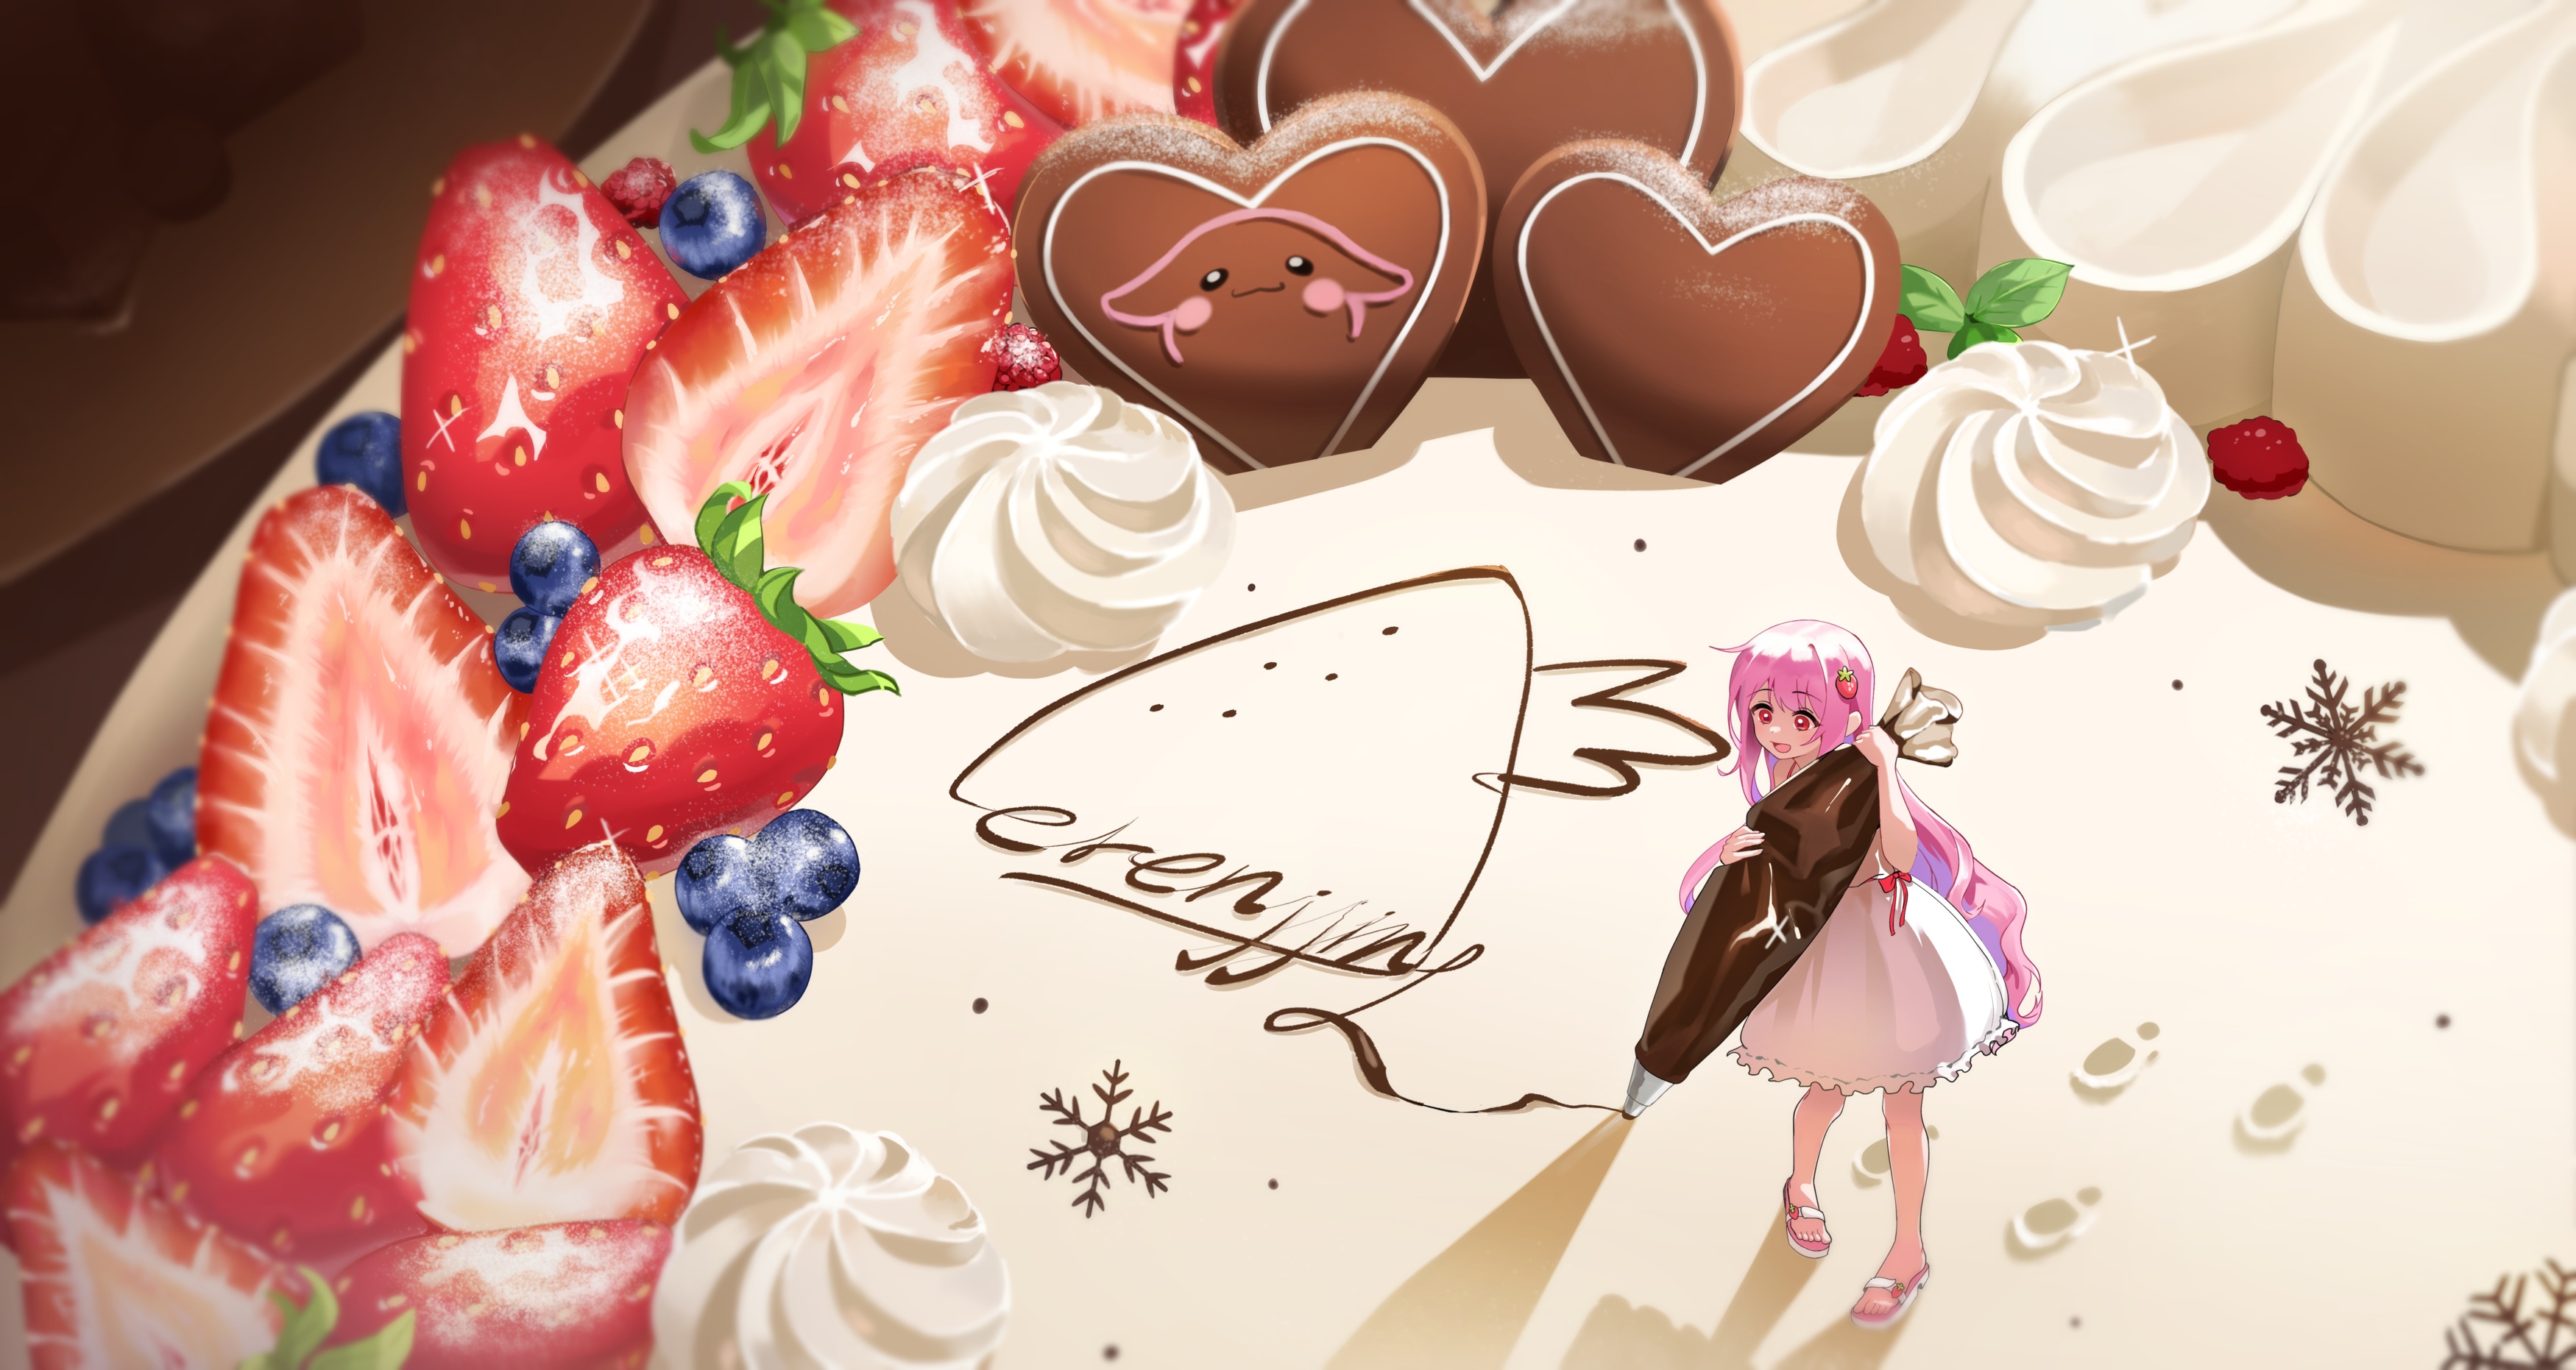 Anime Anime Girls Strawberries Blueberries Fruit Frosting Cake Sweets Long Hair Dress Snowflakes Pin 3500x1862